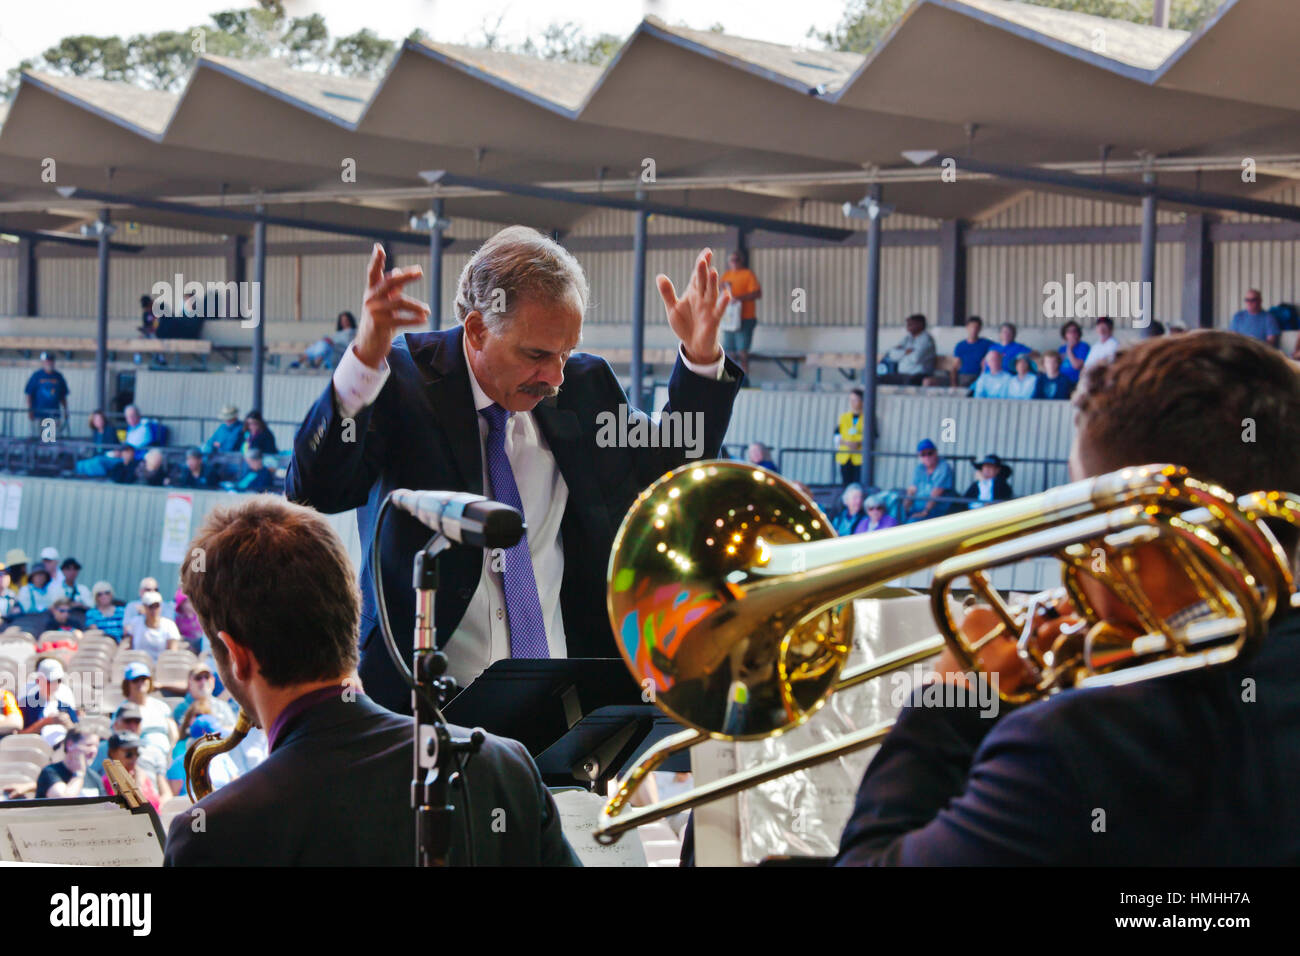 The NEXT GENERATION JAZZ ORCHESTRA directed by PAUL CANTOS AT THE 59TH MONTEREY JAZZ FESTIVAL - CALIFORNIA Stock Photo